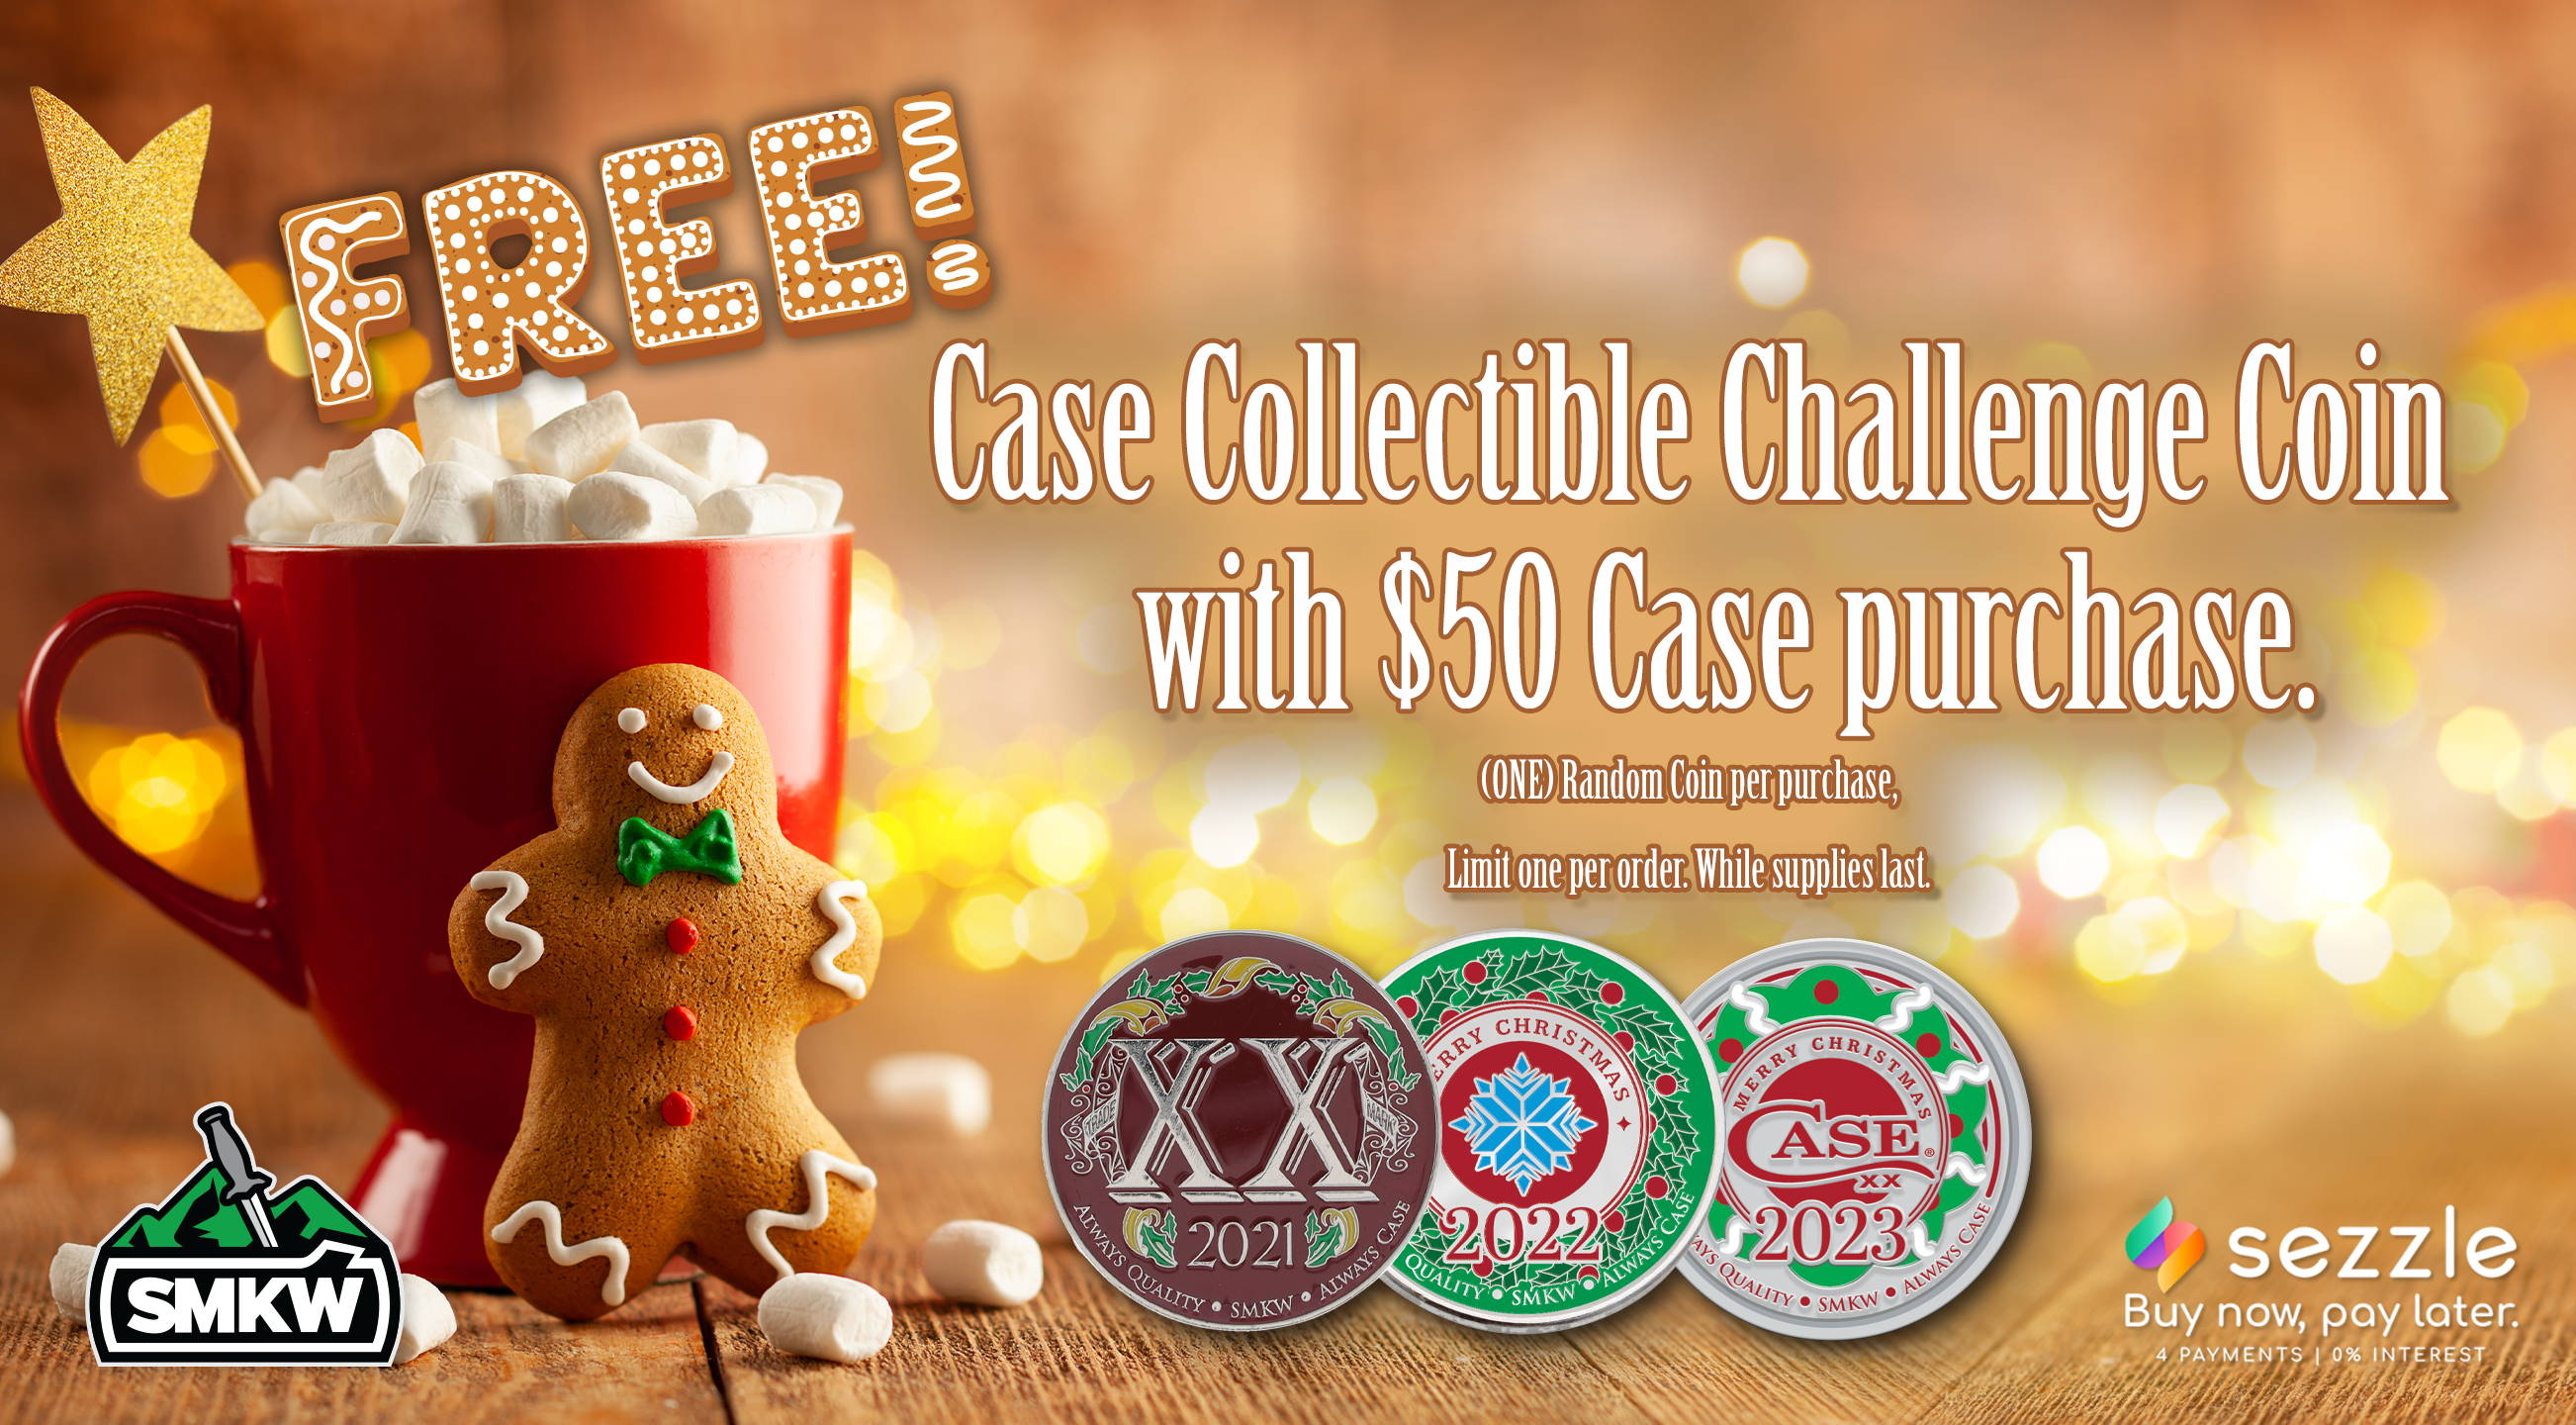 Get 1 random Case Holiday Coin (our choice) with $50 Case Purchase!